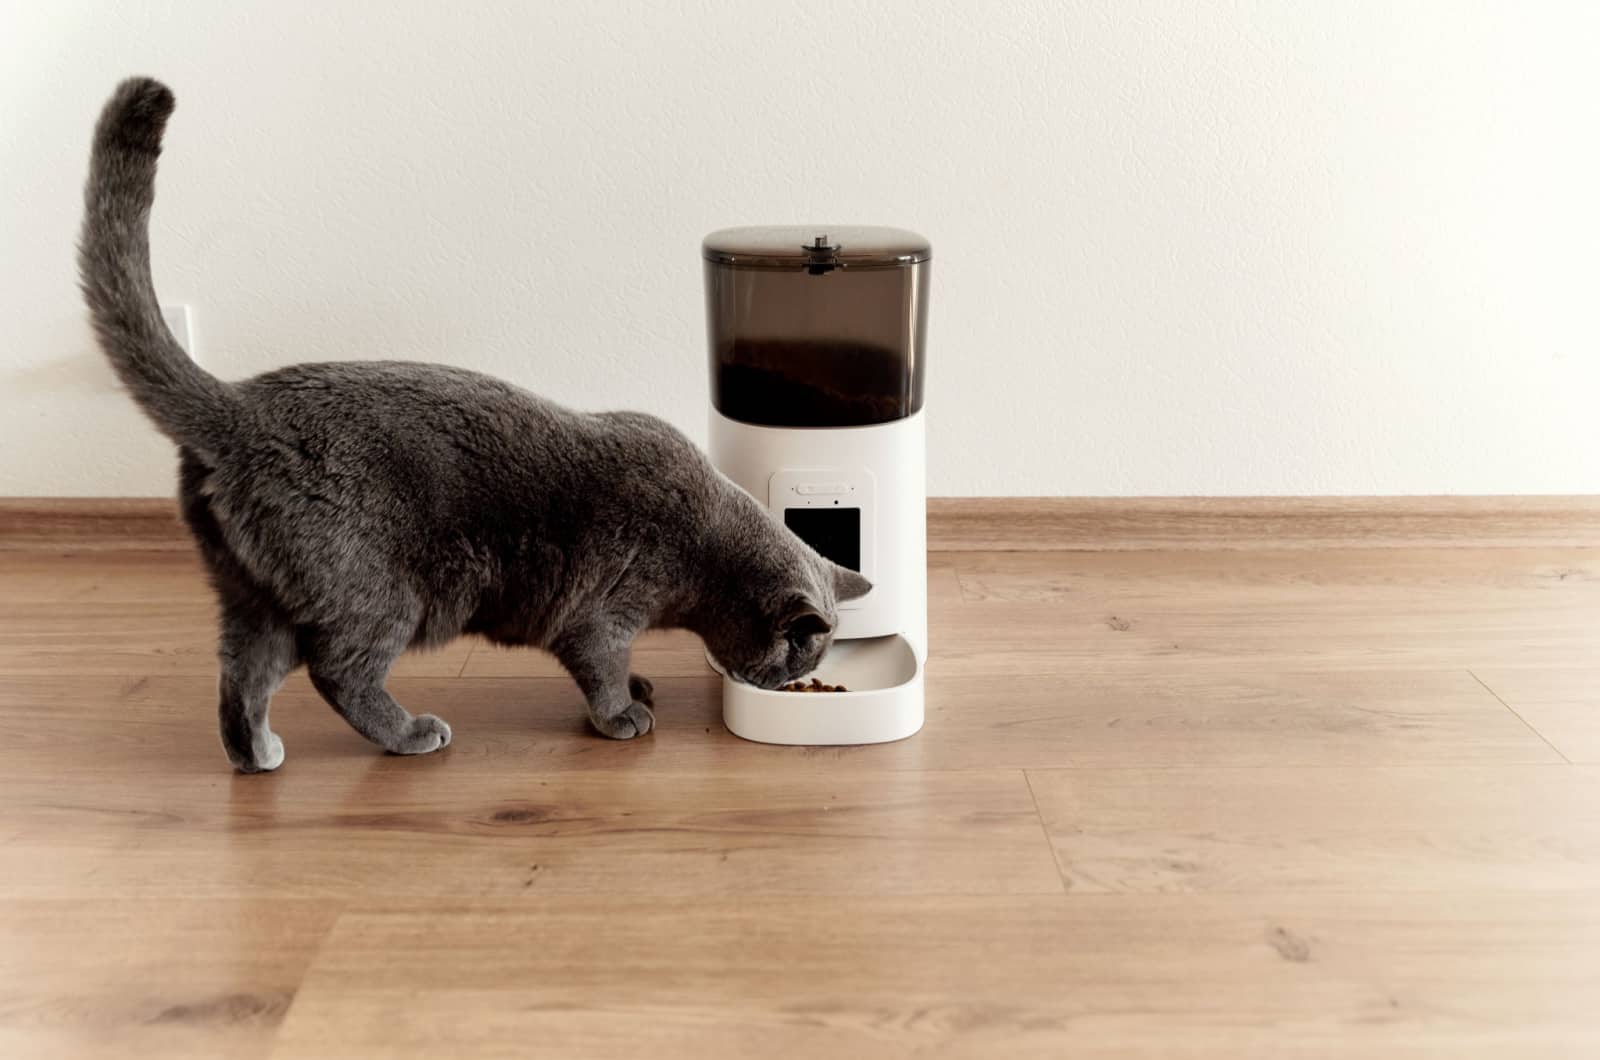 cat eating from an automatic feeder